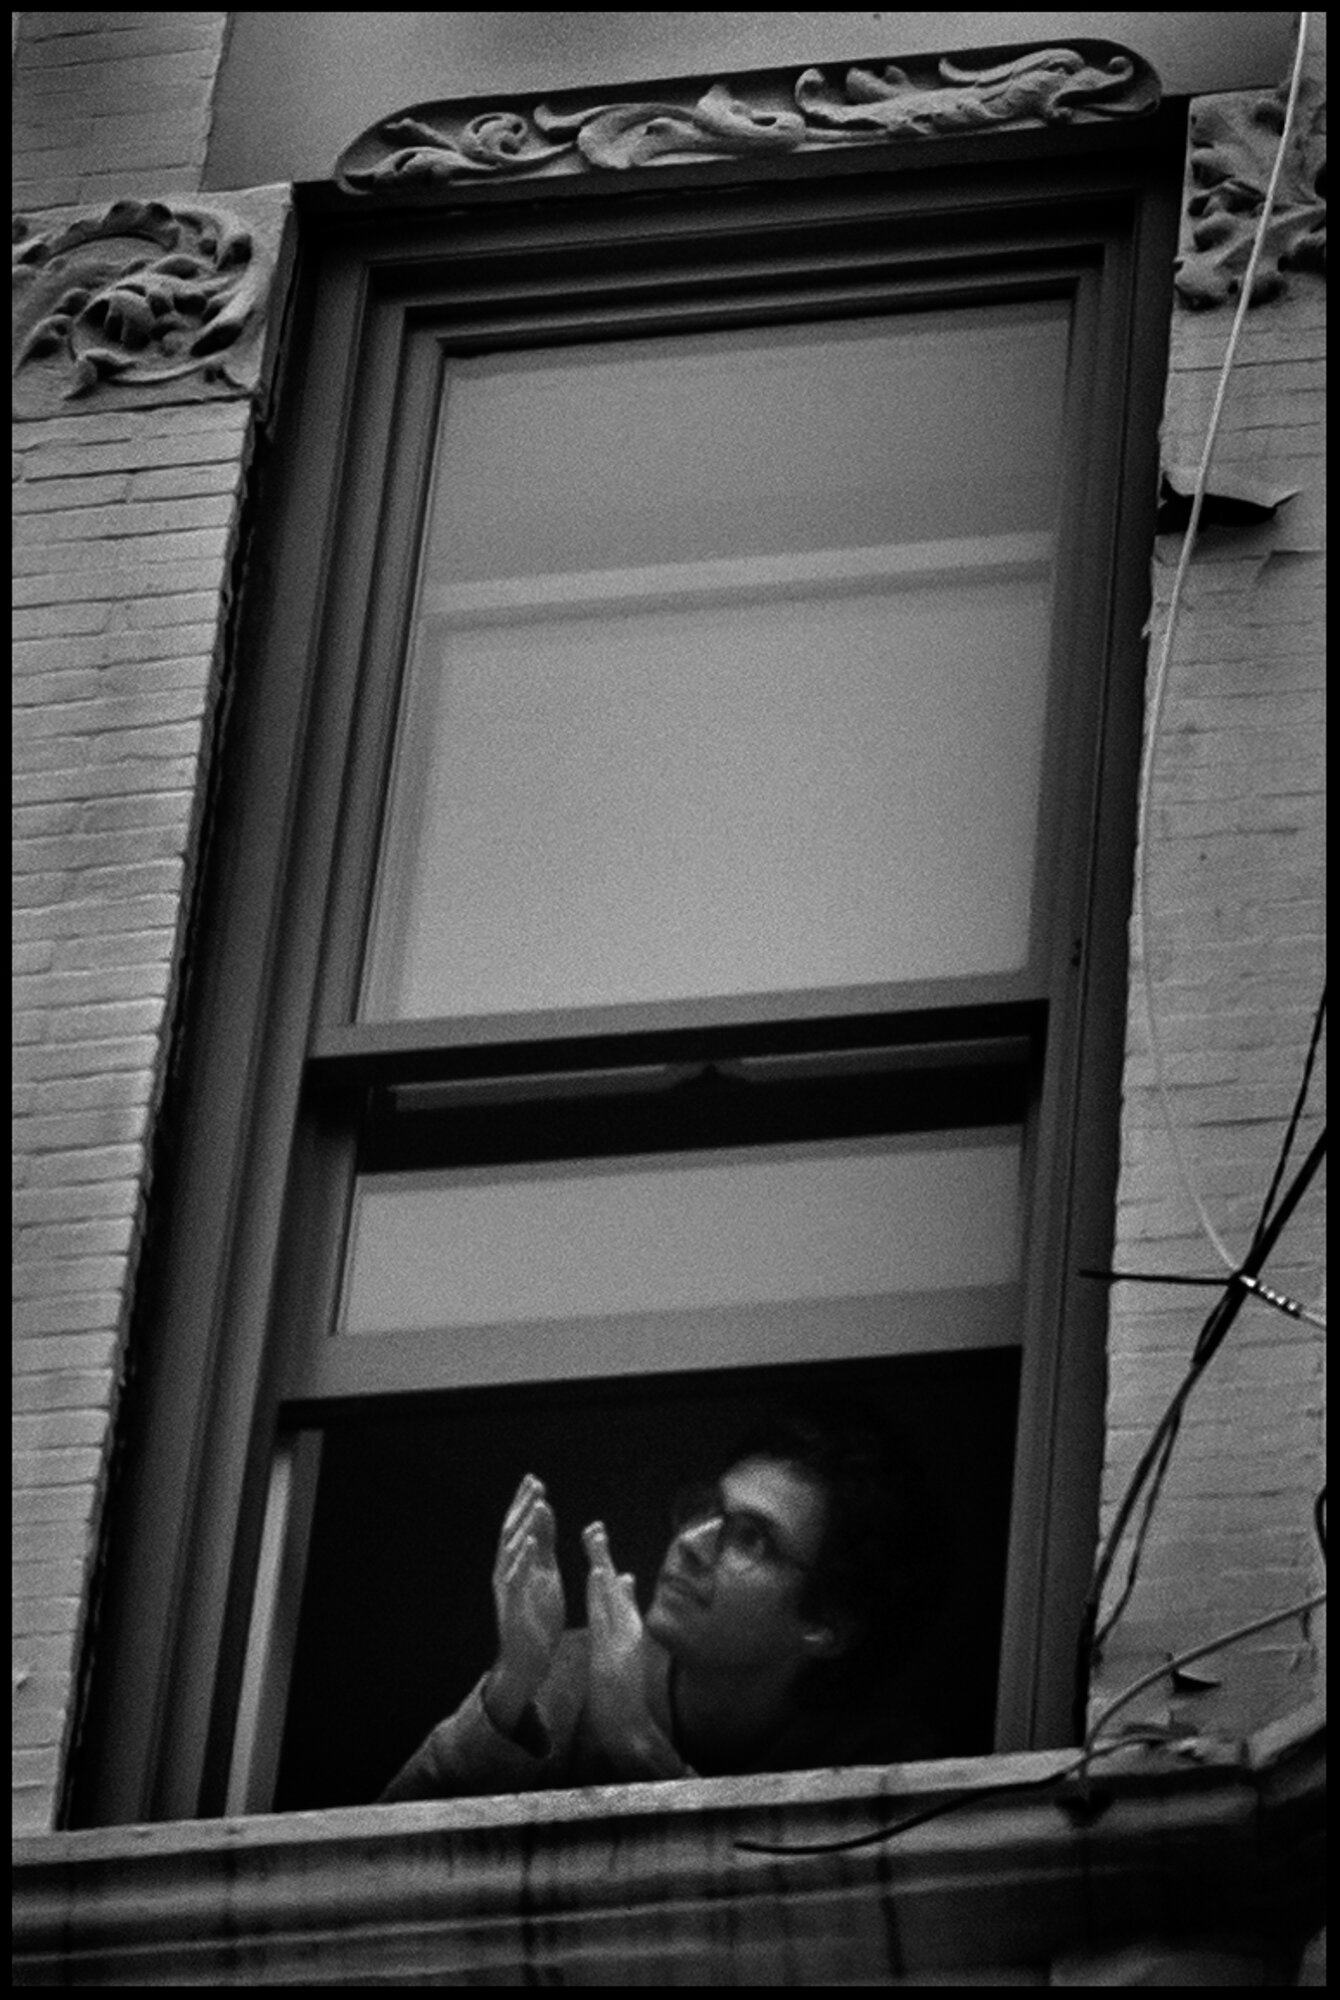  A resident of the Upper Westside claps and expresses her gratitude for all of the healthcare and essential workers. This takes place every evening at 7pm.   April 16, 2020. © Peter Turnley   ID# 22-005 